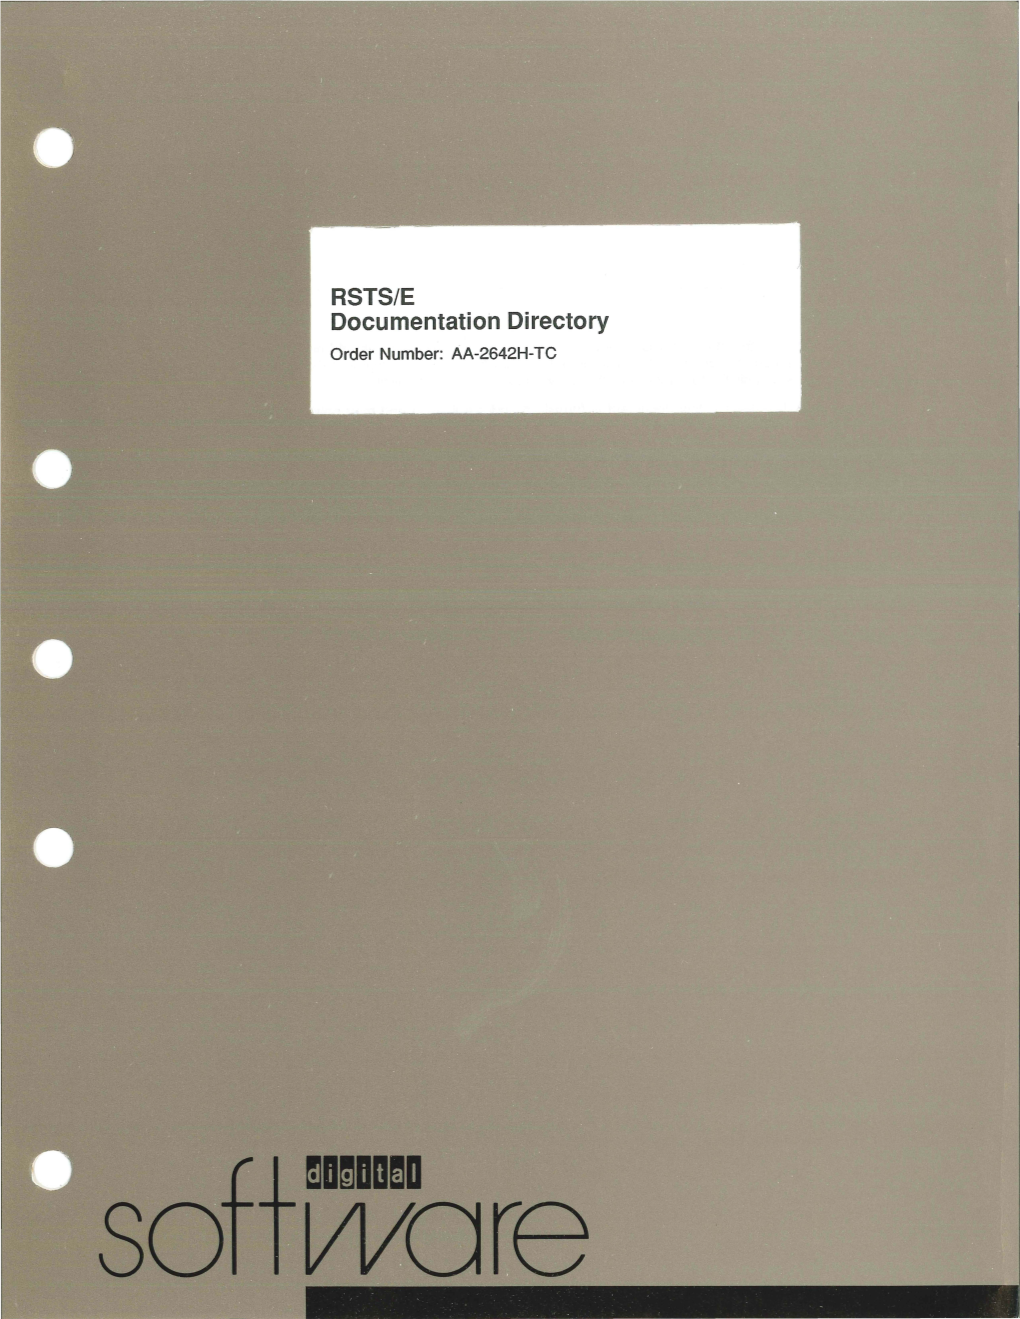 RSTS/E Documentation Directory Order Number: AA-2642H-TC